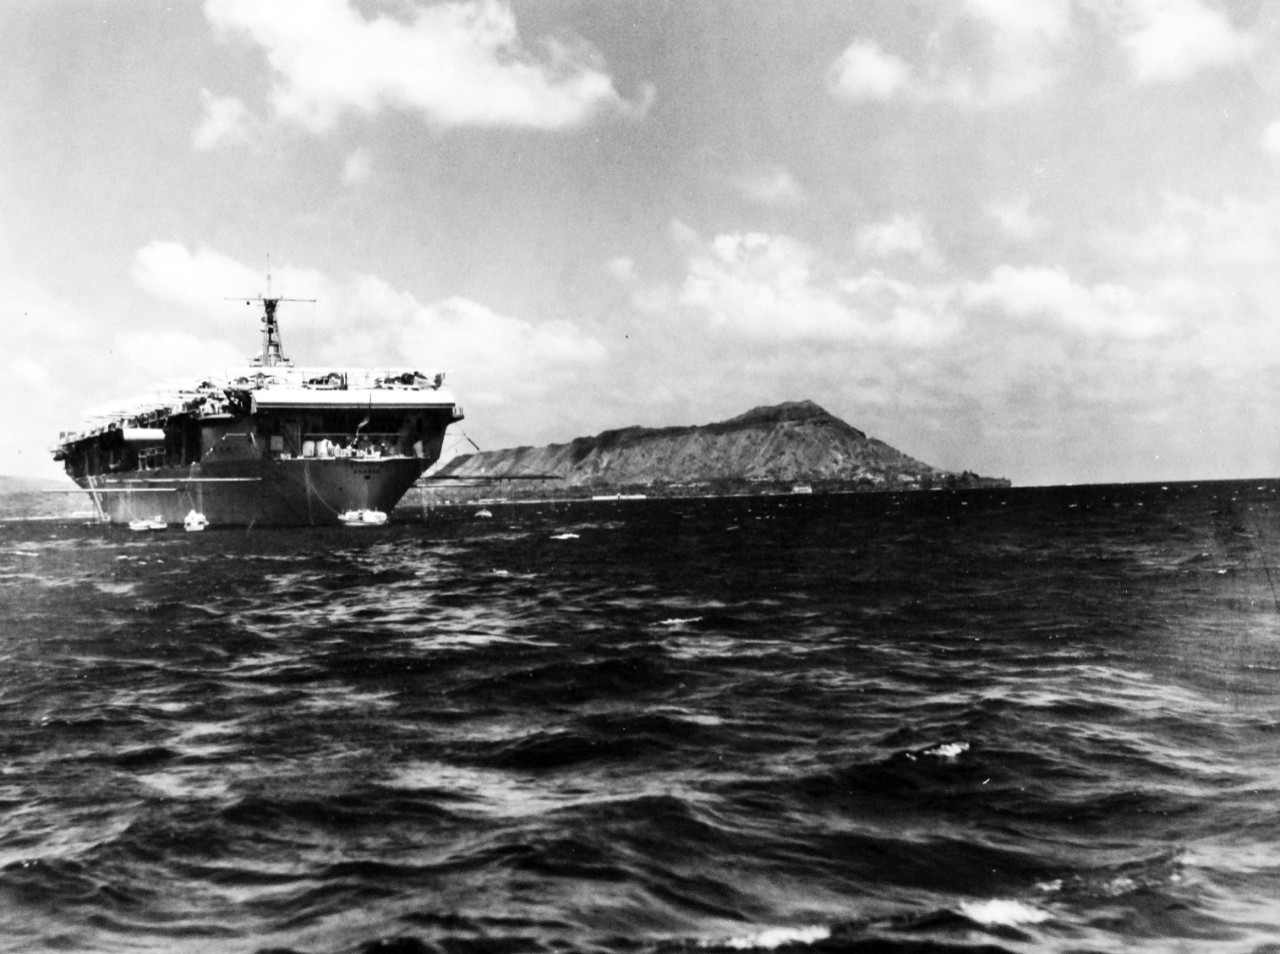 80-CF-Box 18-1:  USS Ranger (CV-4),  1935.    Ranger at anchor at Honolulu, Territory of Hawaii, May 29, 1935.  Official U.S. Navy Photograph, now in the collections of the National Archives.  (2015/6/16).